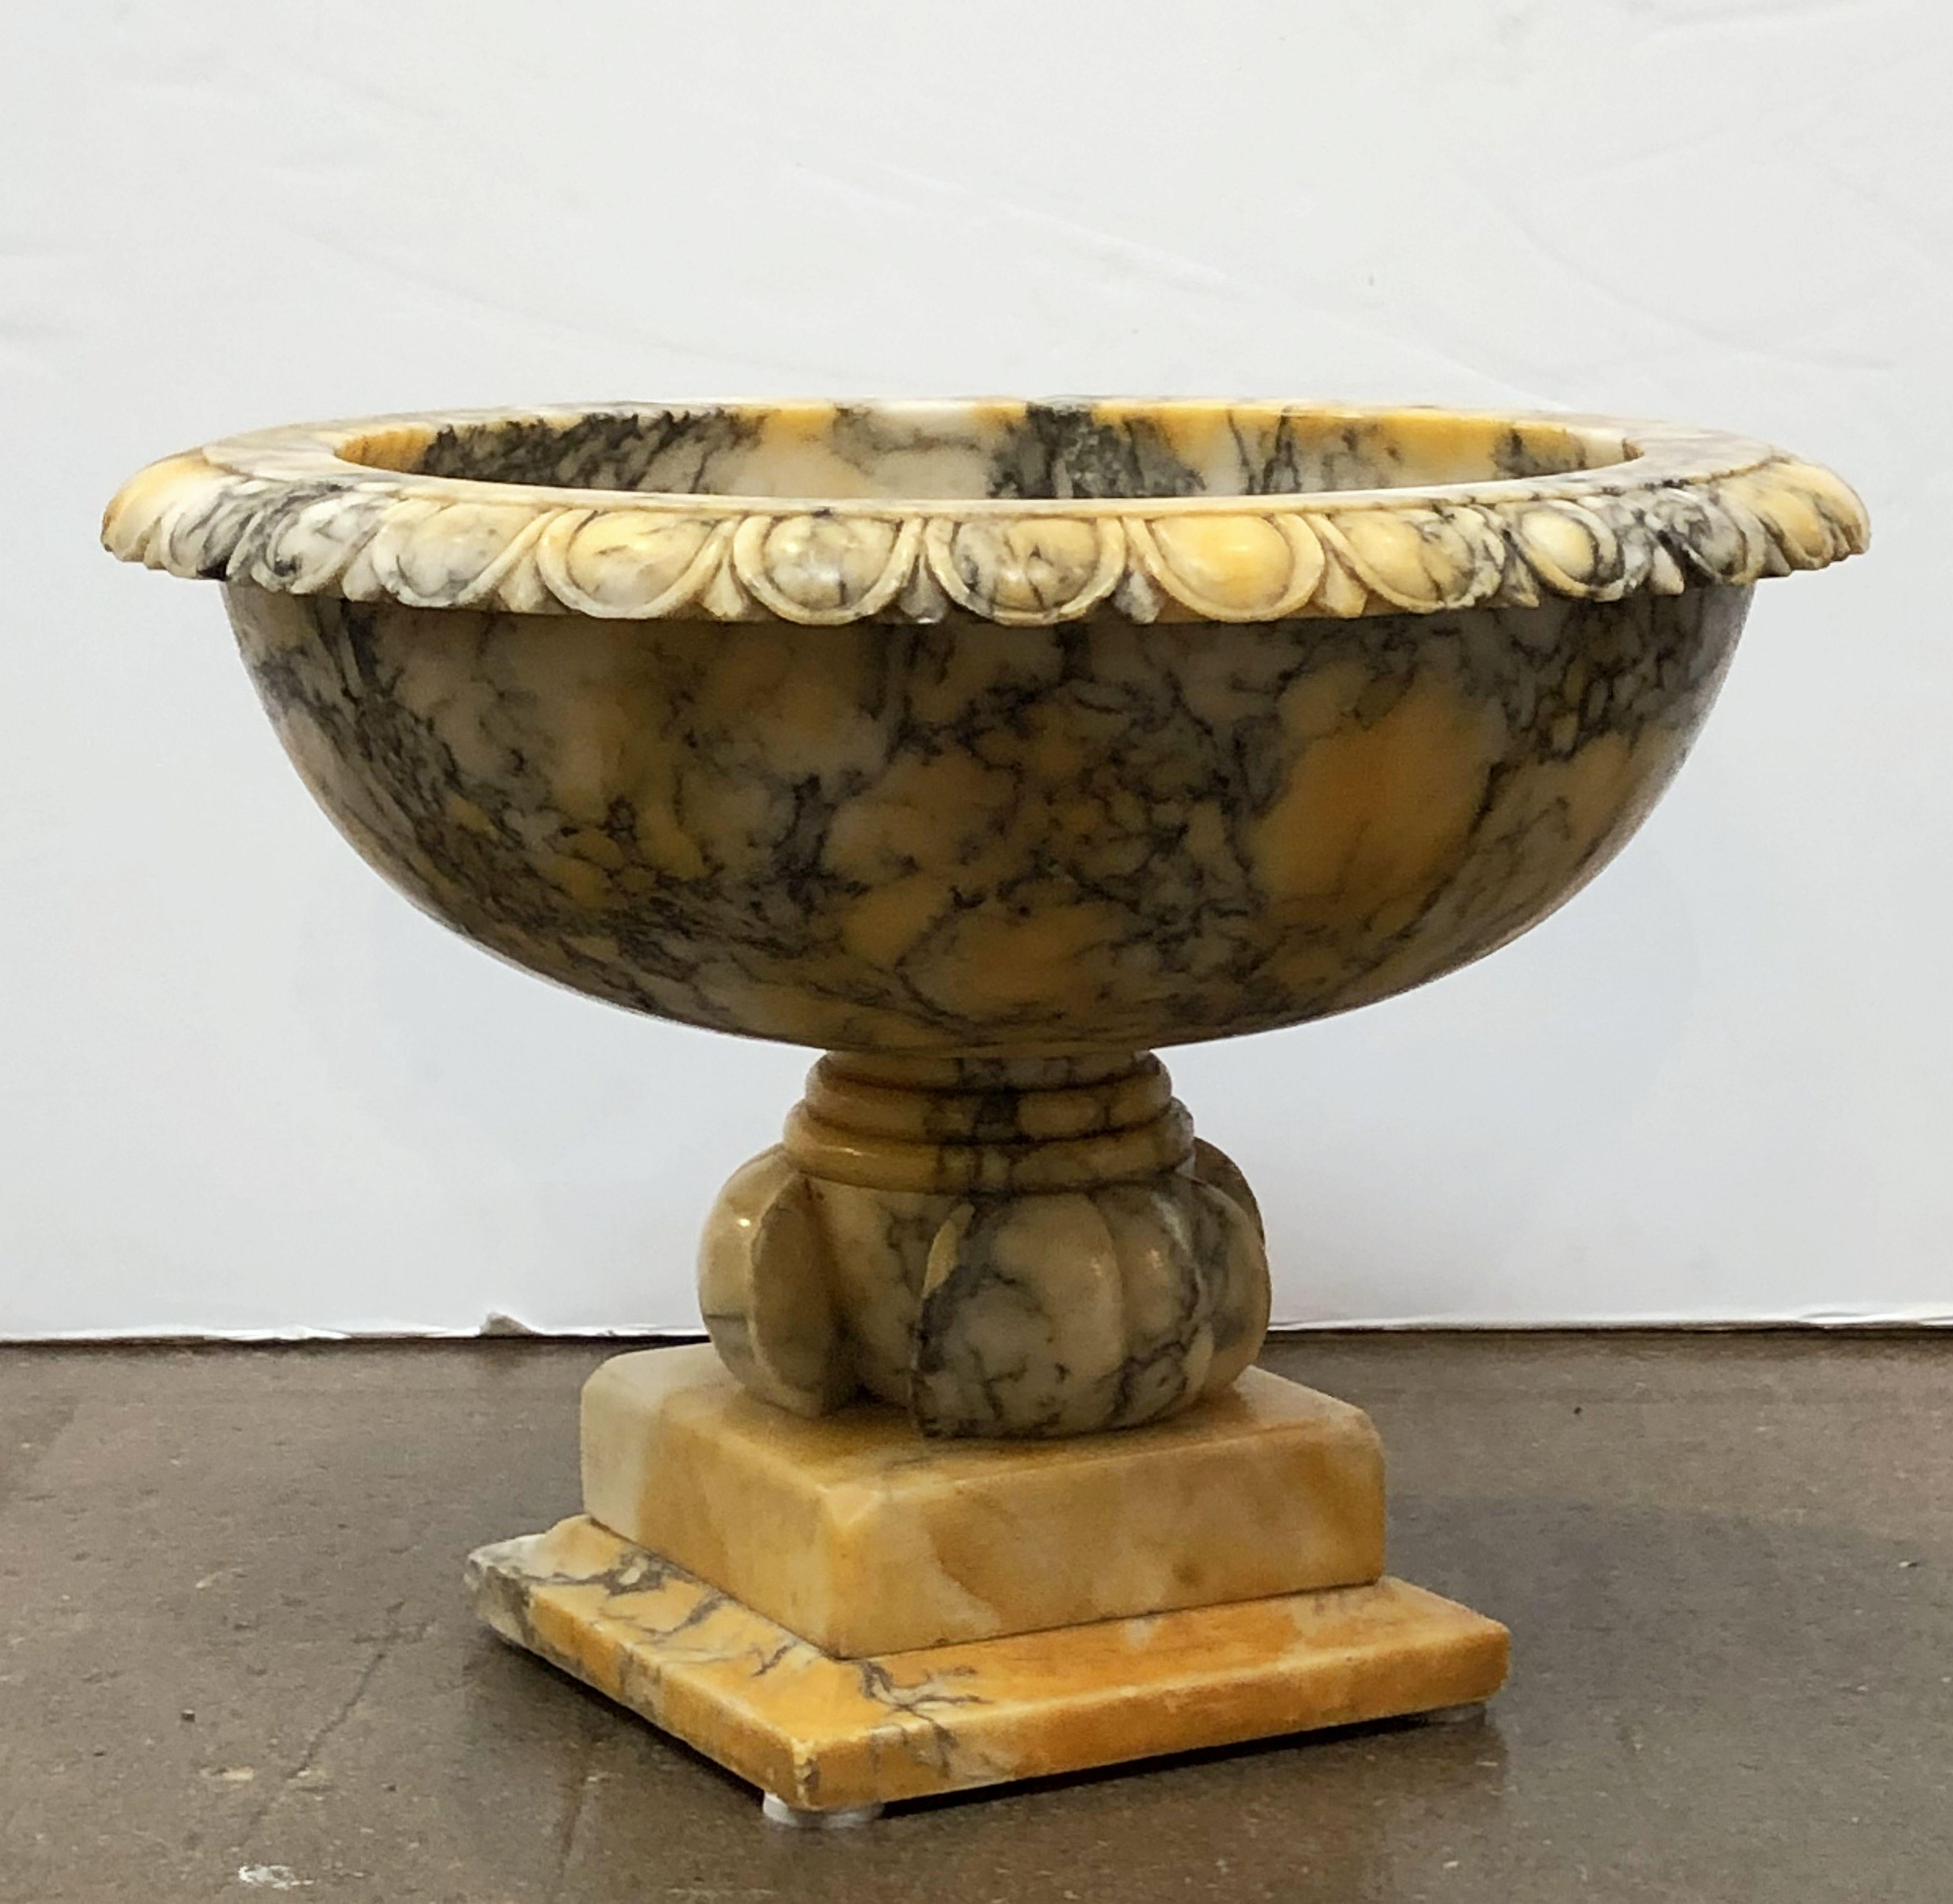 20th Century Alabaster Urn or Bowl on Pedestal from Italy